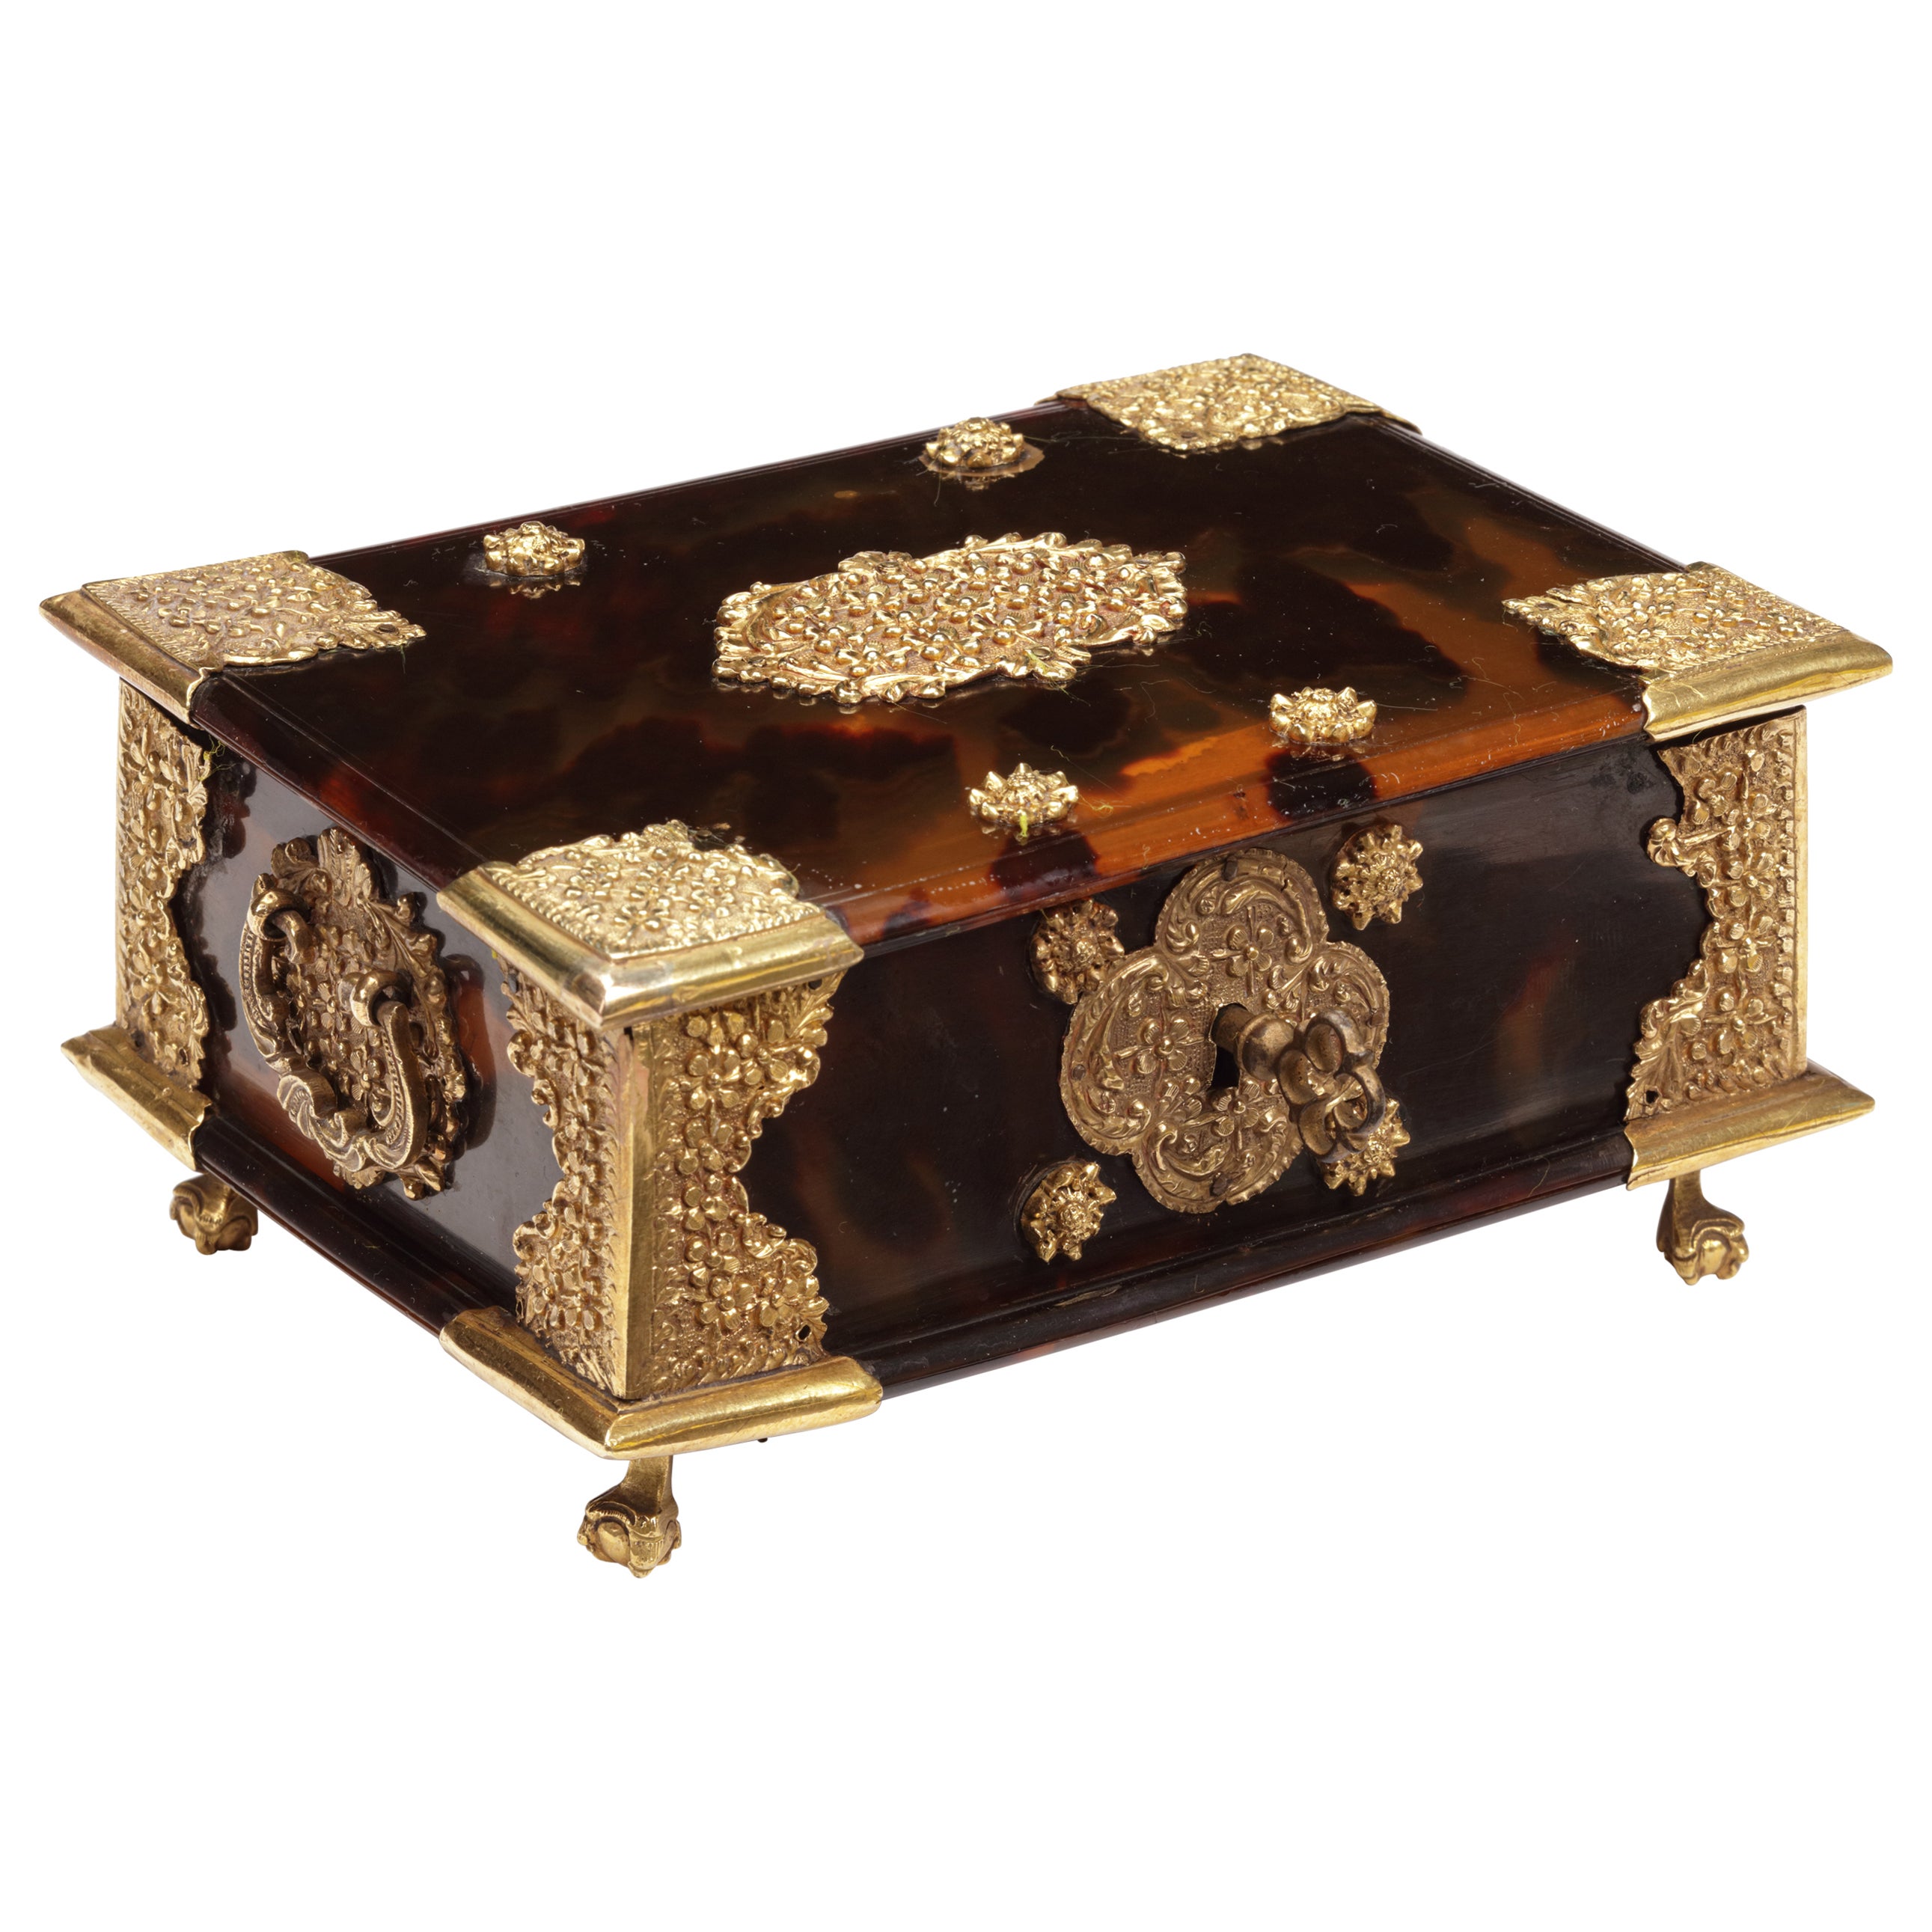 A small Dutch colonial Indonesian tortoiseshell betel box with gold mounts